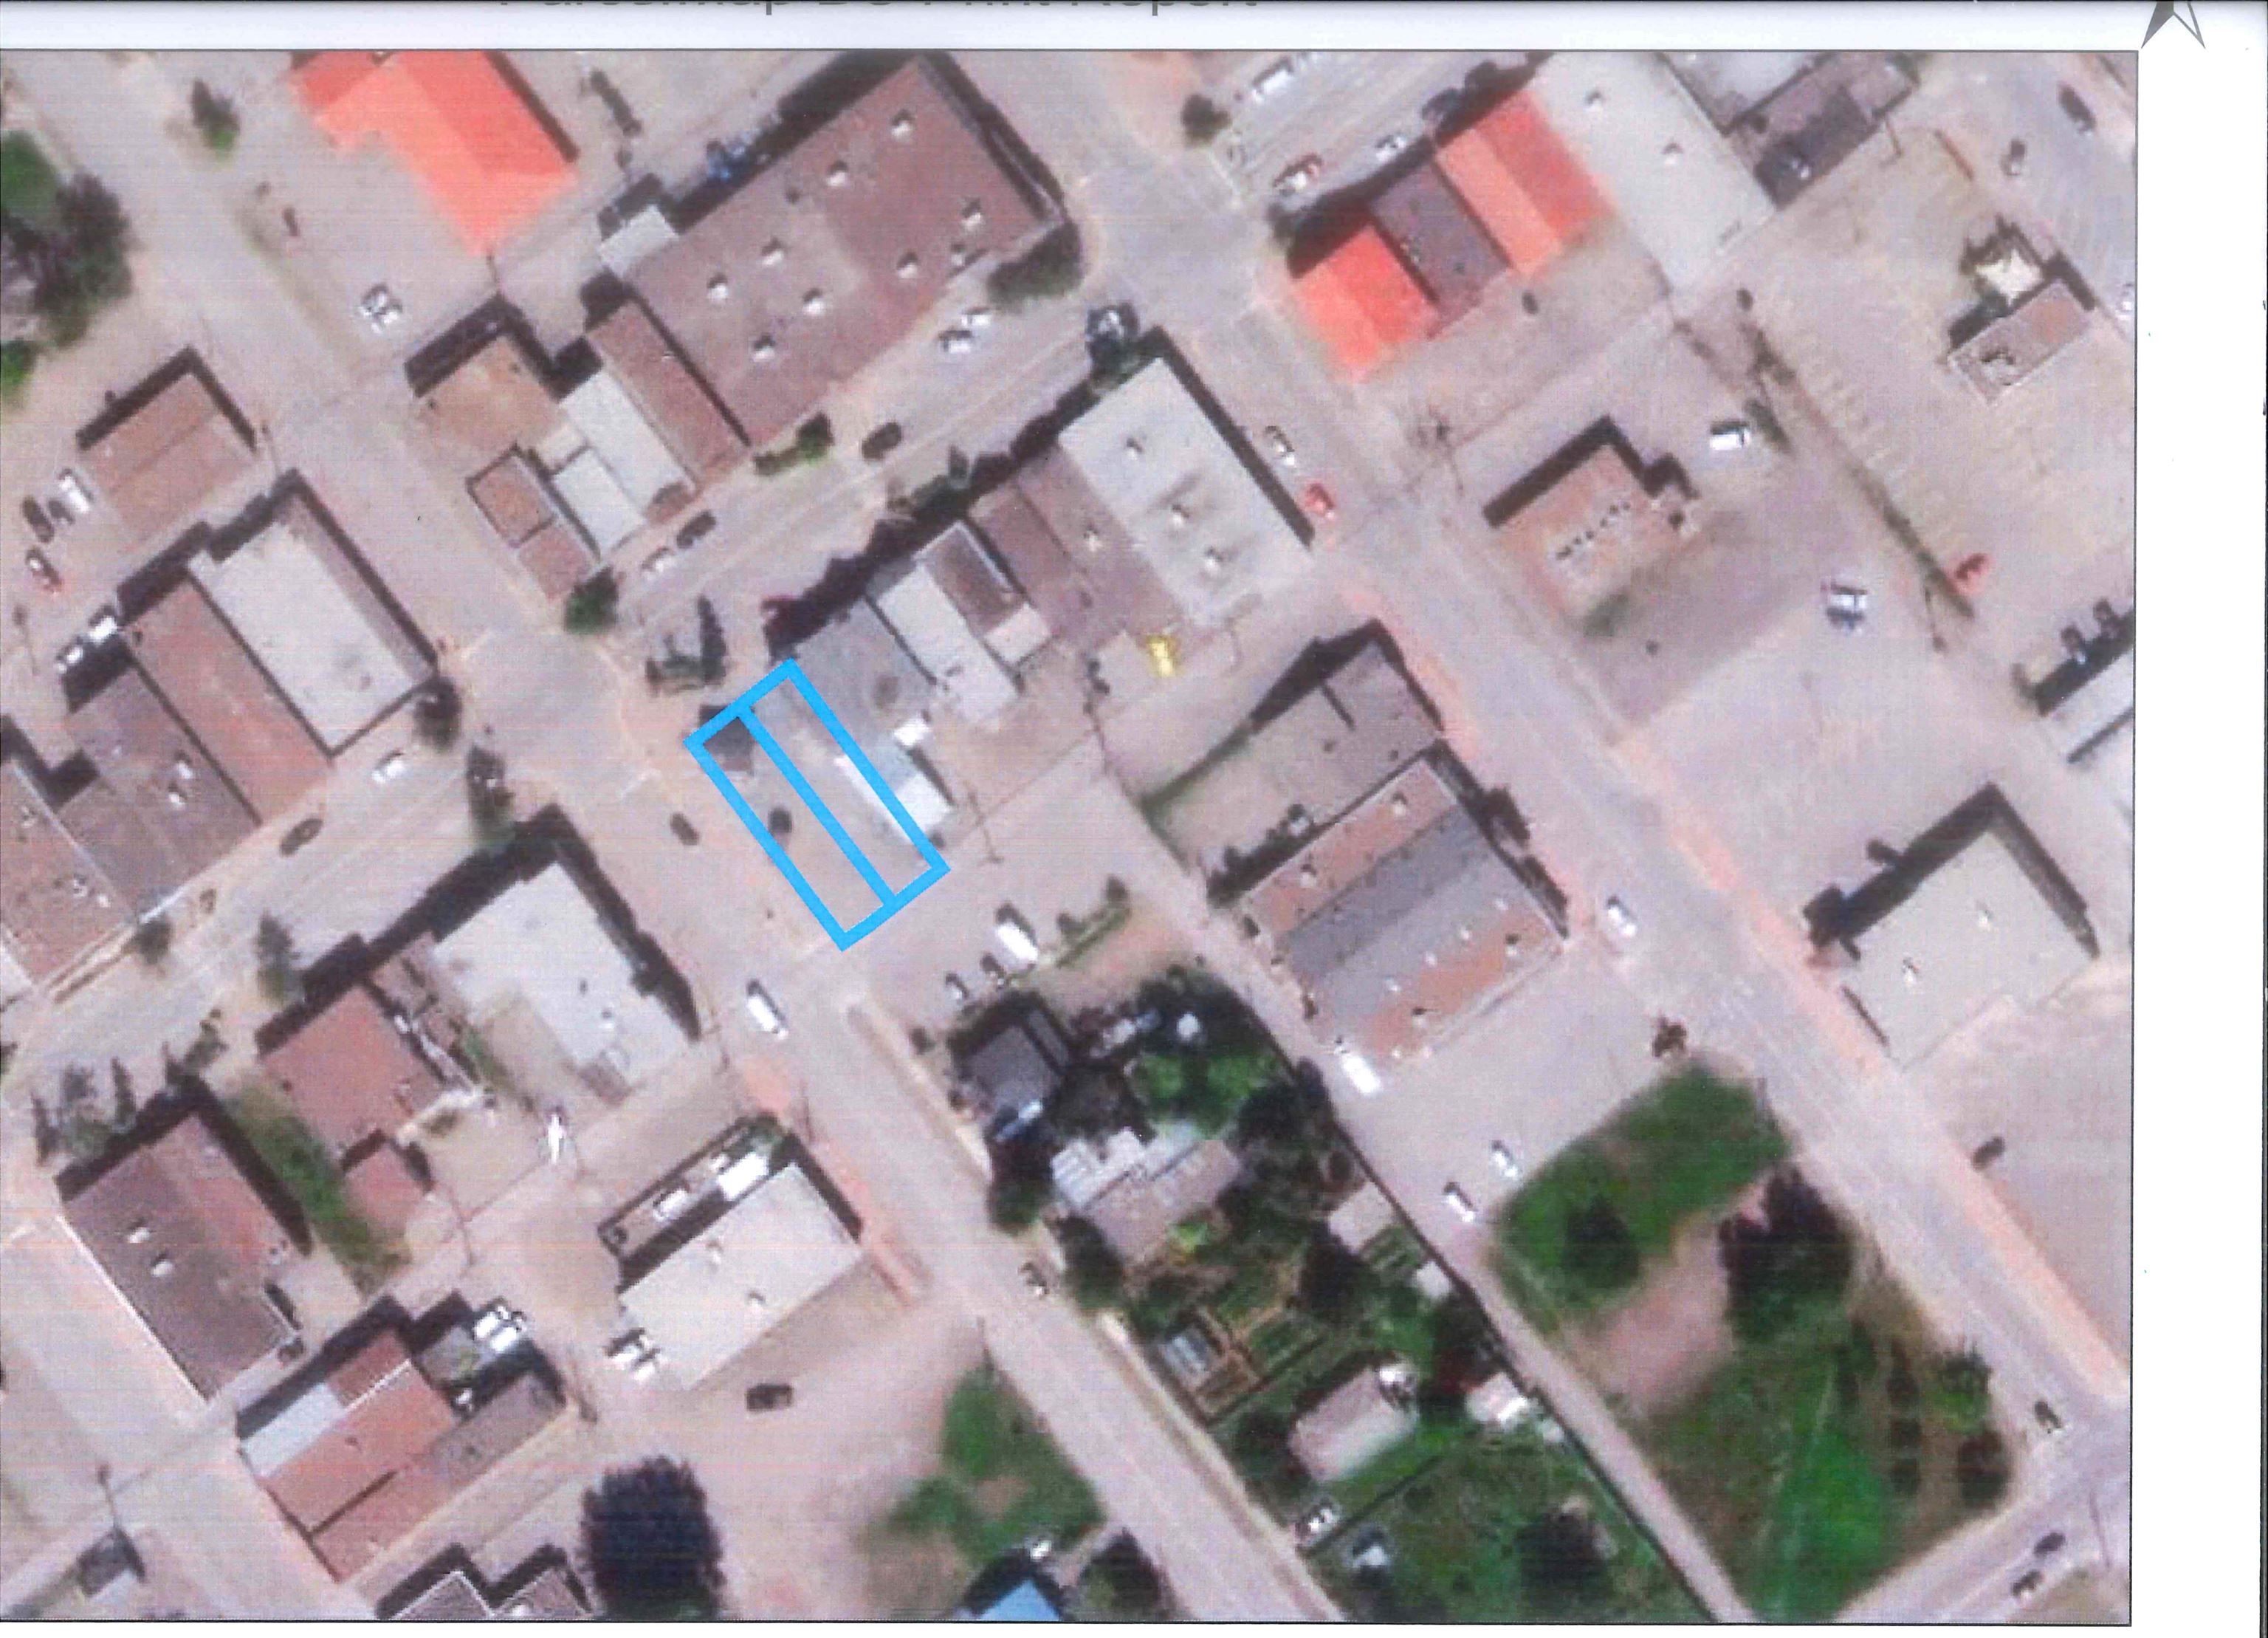 Main Photo: 1206 MAIN Street in Smithers: Smithers - Town Land Commercial for sale (Smithers And Area)  : MLS®# C8052156